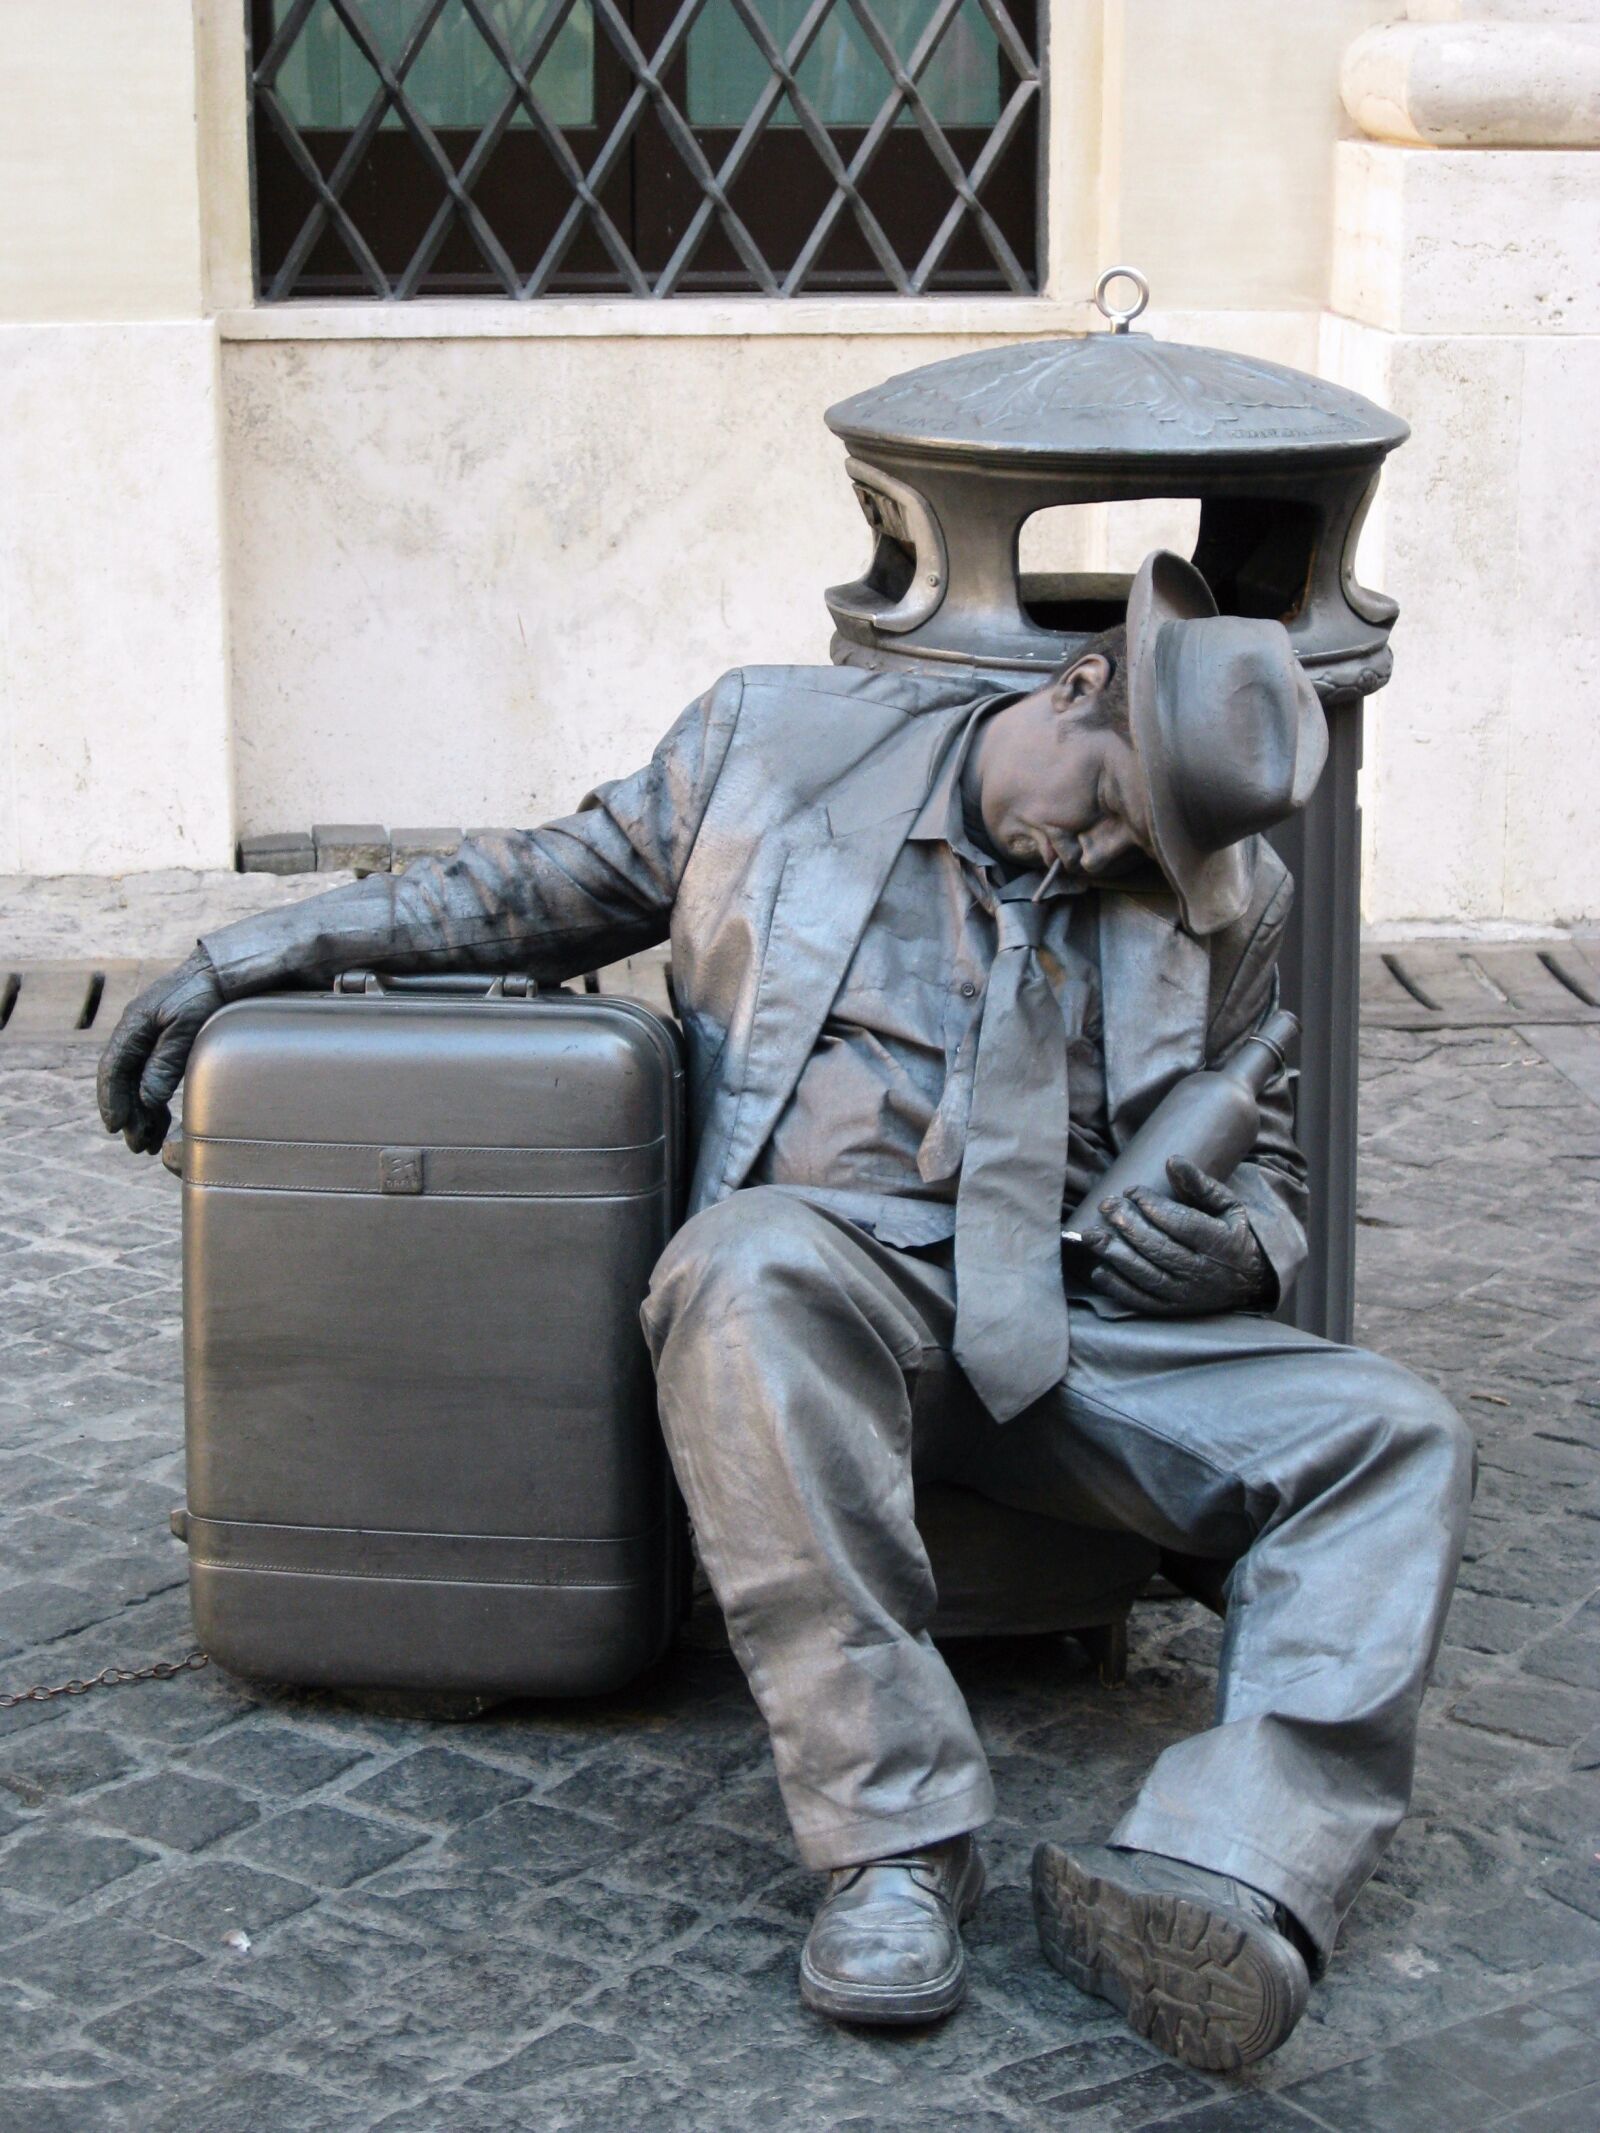 Canon PowerShot SD1100 IS (Digital IXUS 80 IS / IXY Digital 20 IS) sample photo. Living statue, rome, italy photography